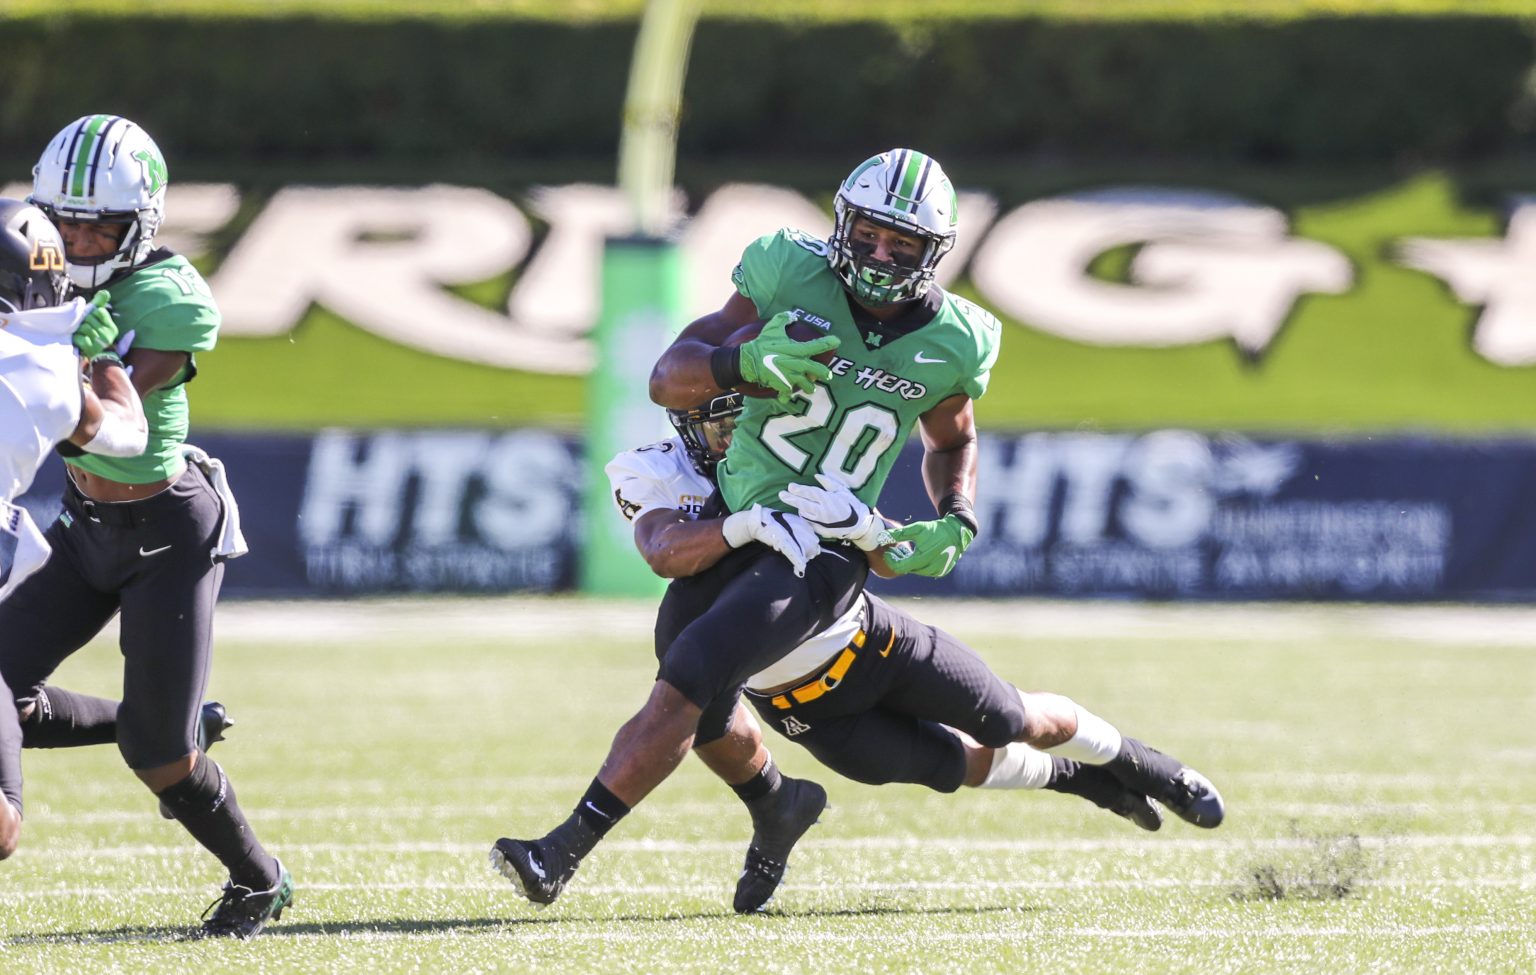 GALLERY Marshall tops App State WV MetroNews